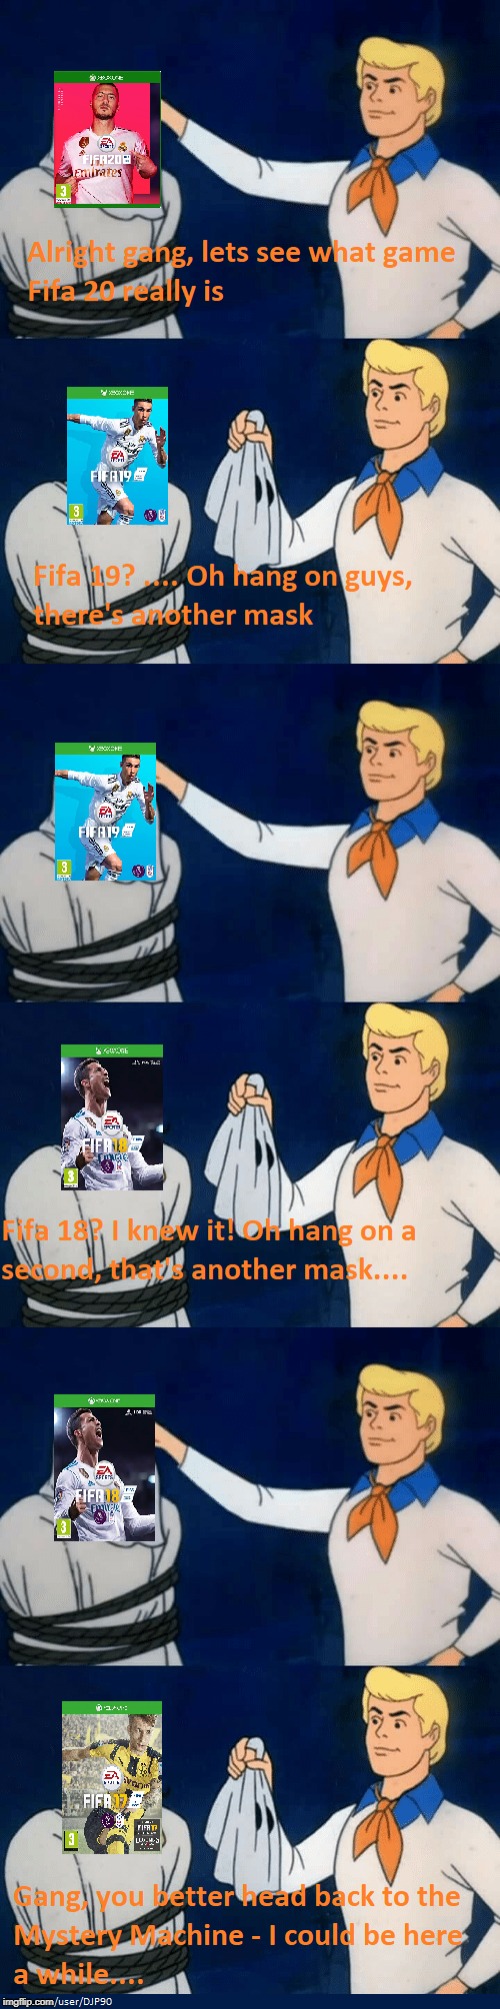 Fifa Scooby Doo Alright Gang | image tagged in fifa,scooby doo,alright gang,fred jones,mystery machine | made w/ Imgflip meme maker